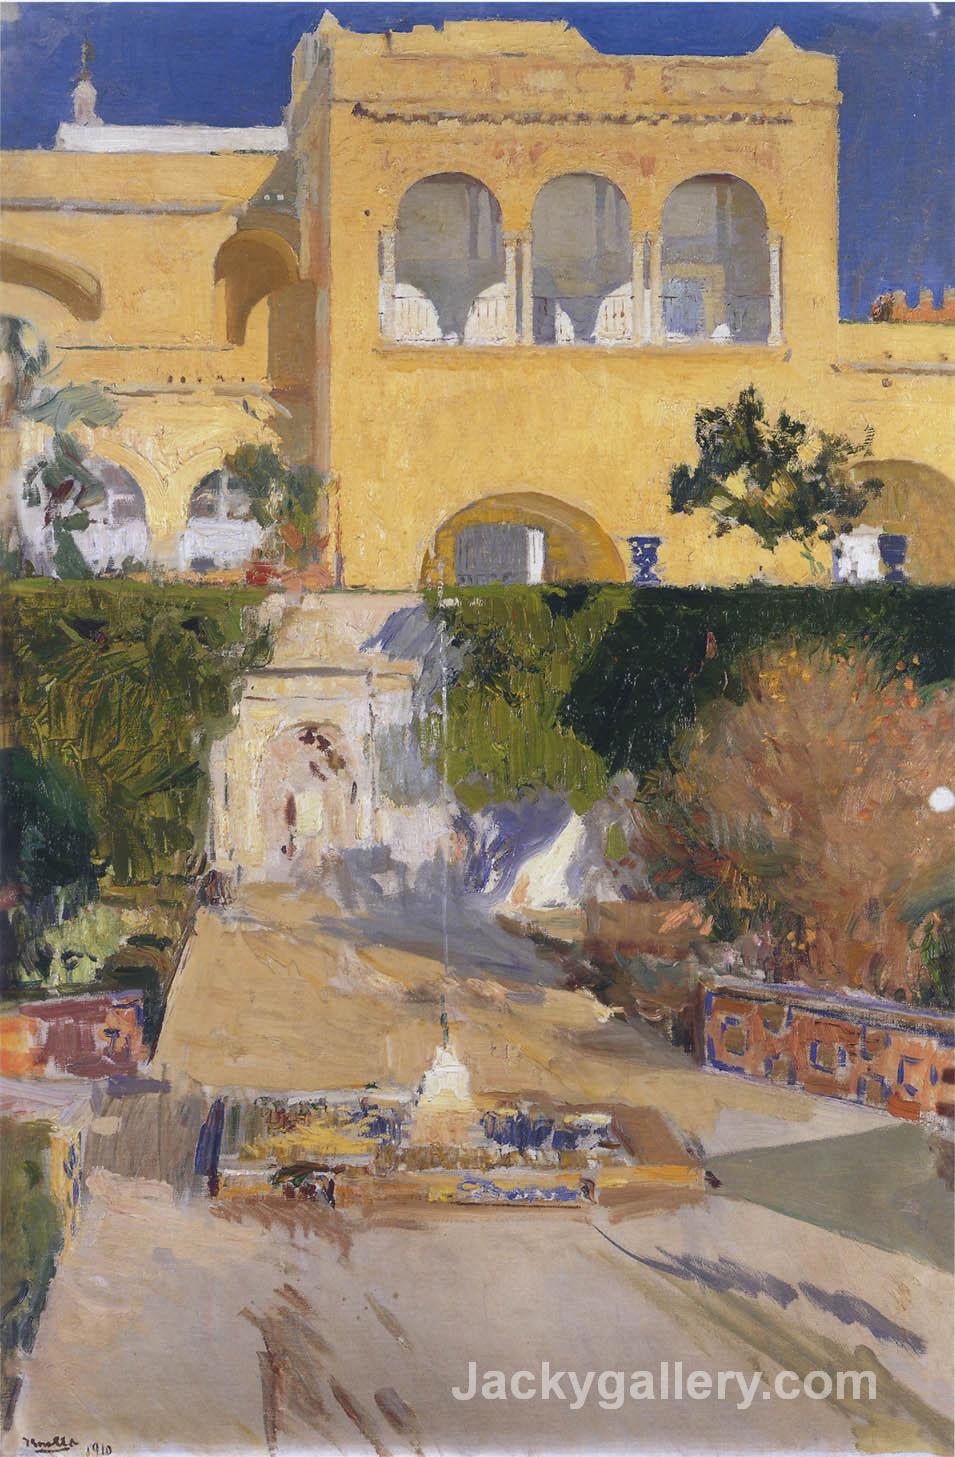 Afternoon sun at the Alcazar of Seville by Joaquin Sorolla y Bastida paintings reproduction